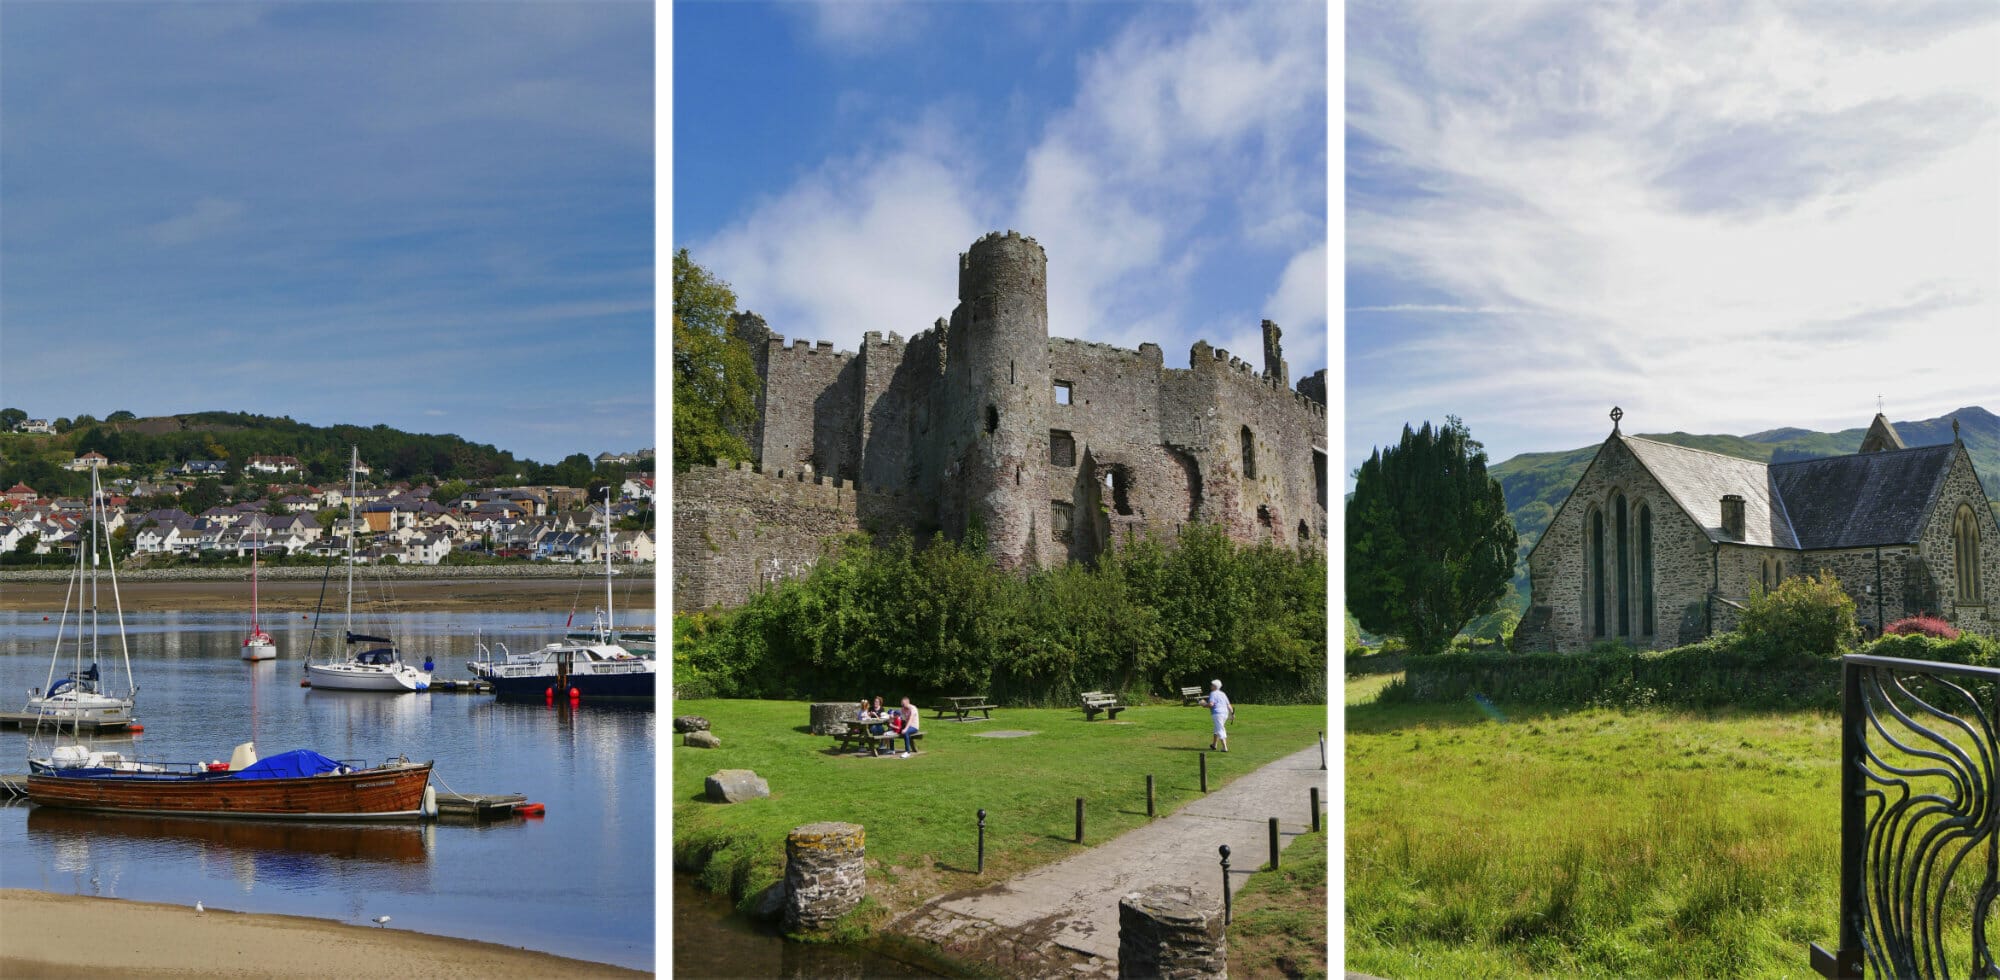 23+ Picturesque Things to Do in North Wales (2022) via @girlsgonelondon